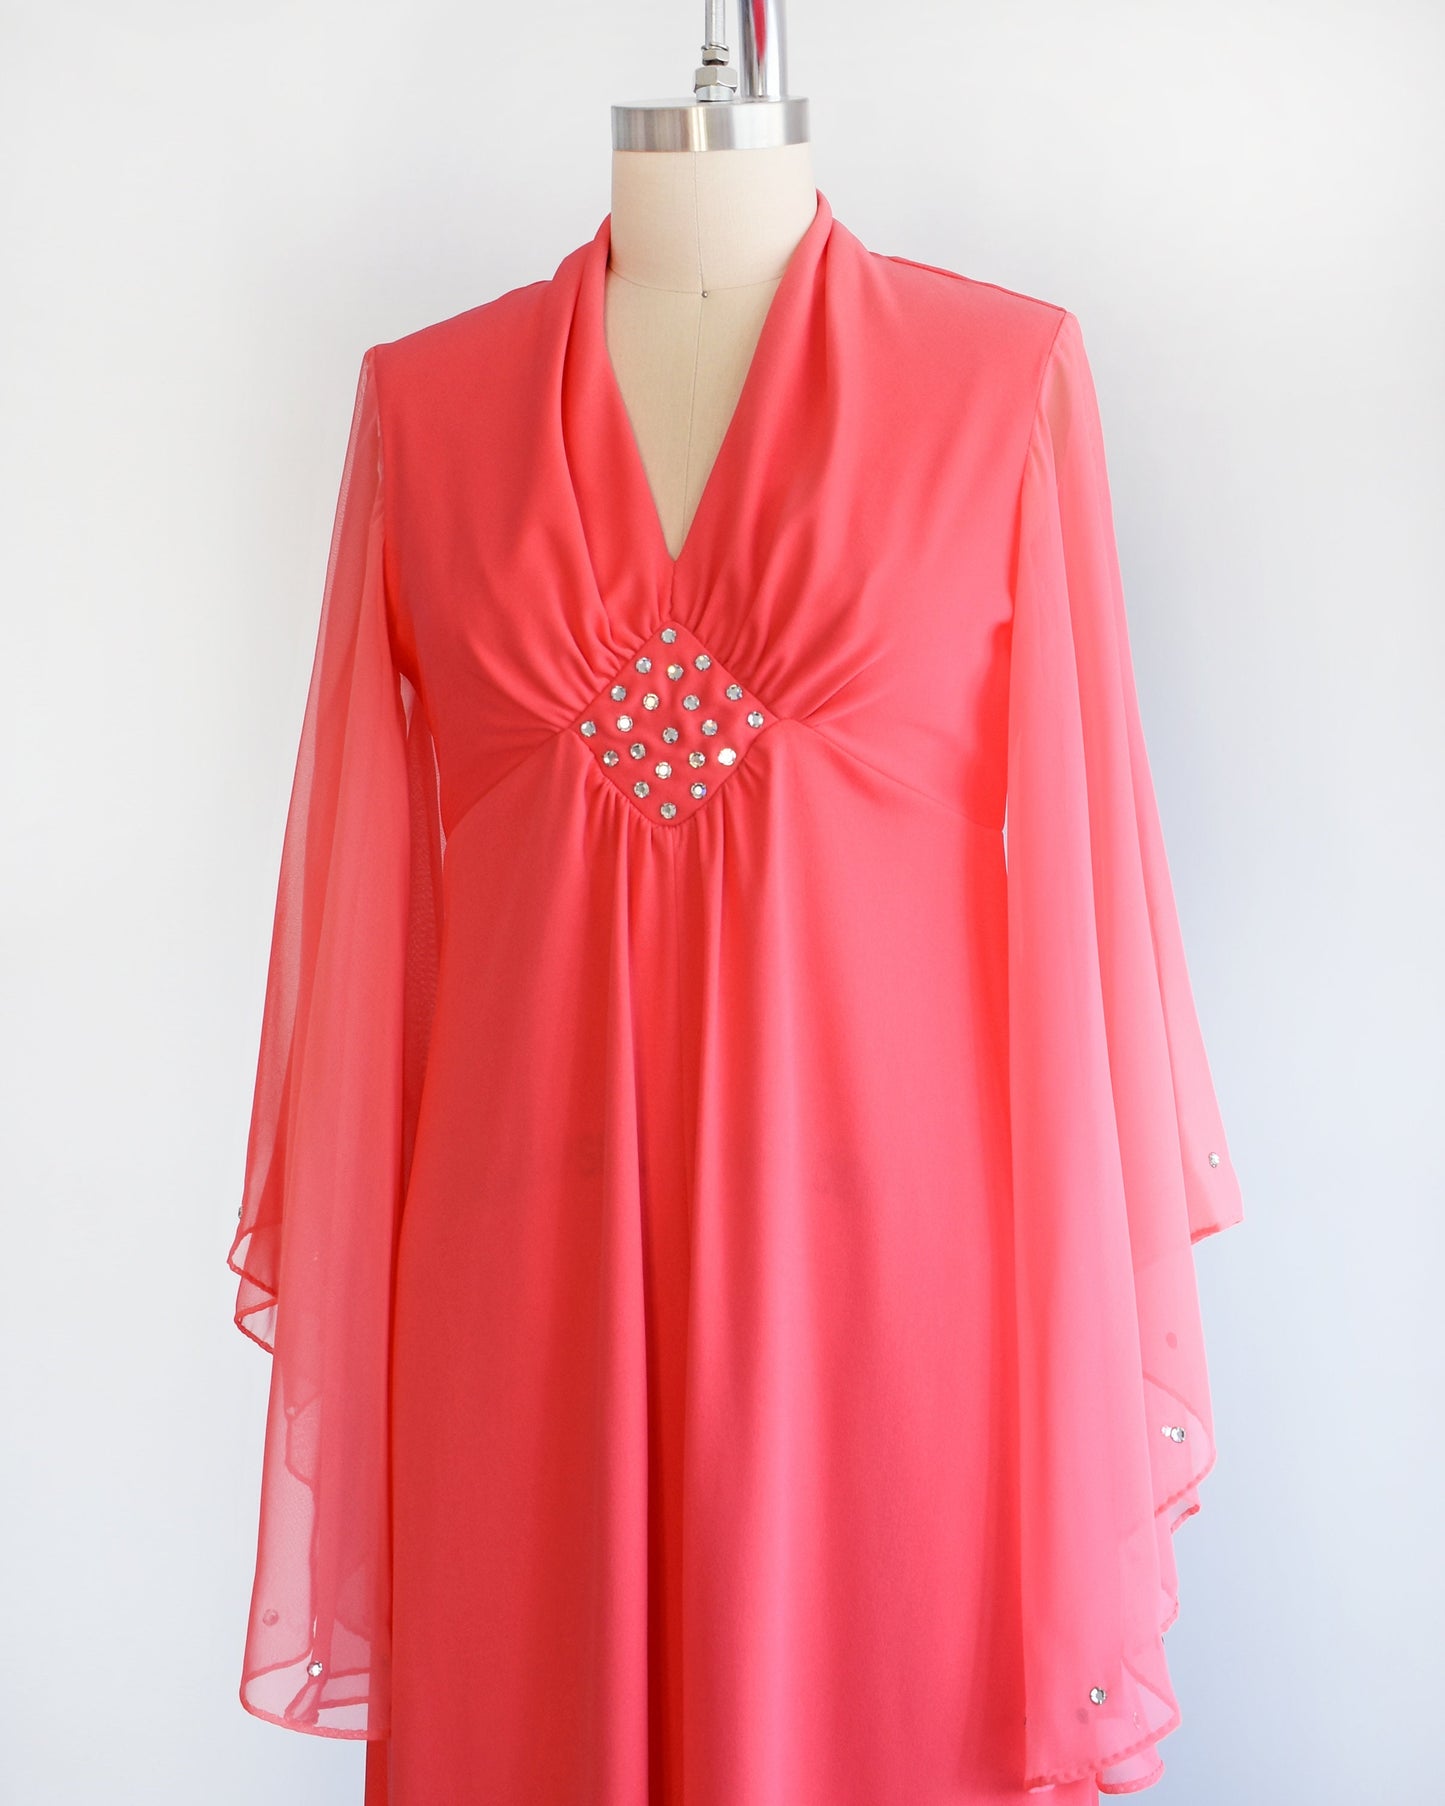 Side front view of a vintage 70s coral pink maxi dress that has a v-neckline, rhinestones on the waist, and semi-sheer long angel sleeves with matching rhinestone trim. The dress is modeled on a dress form.